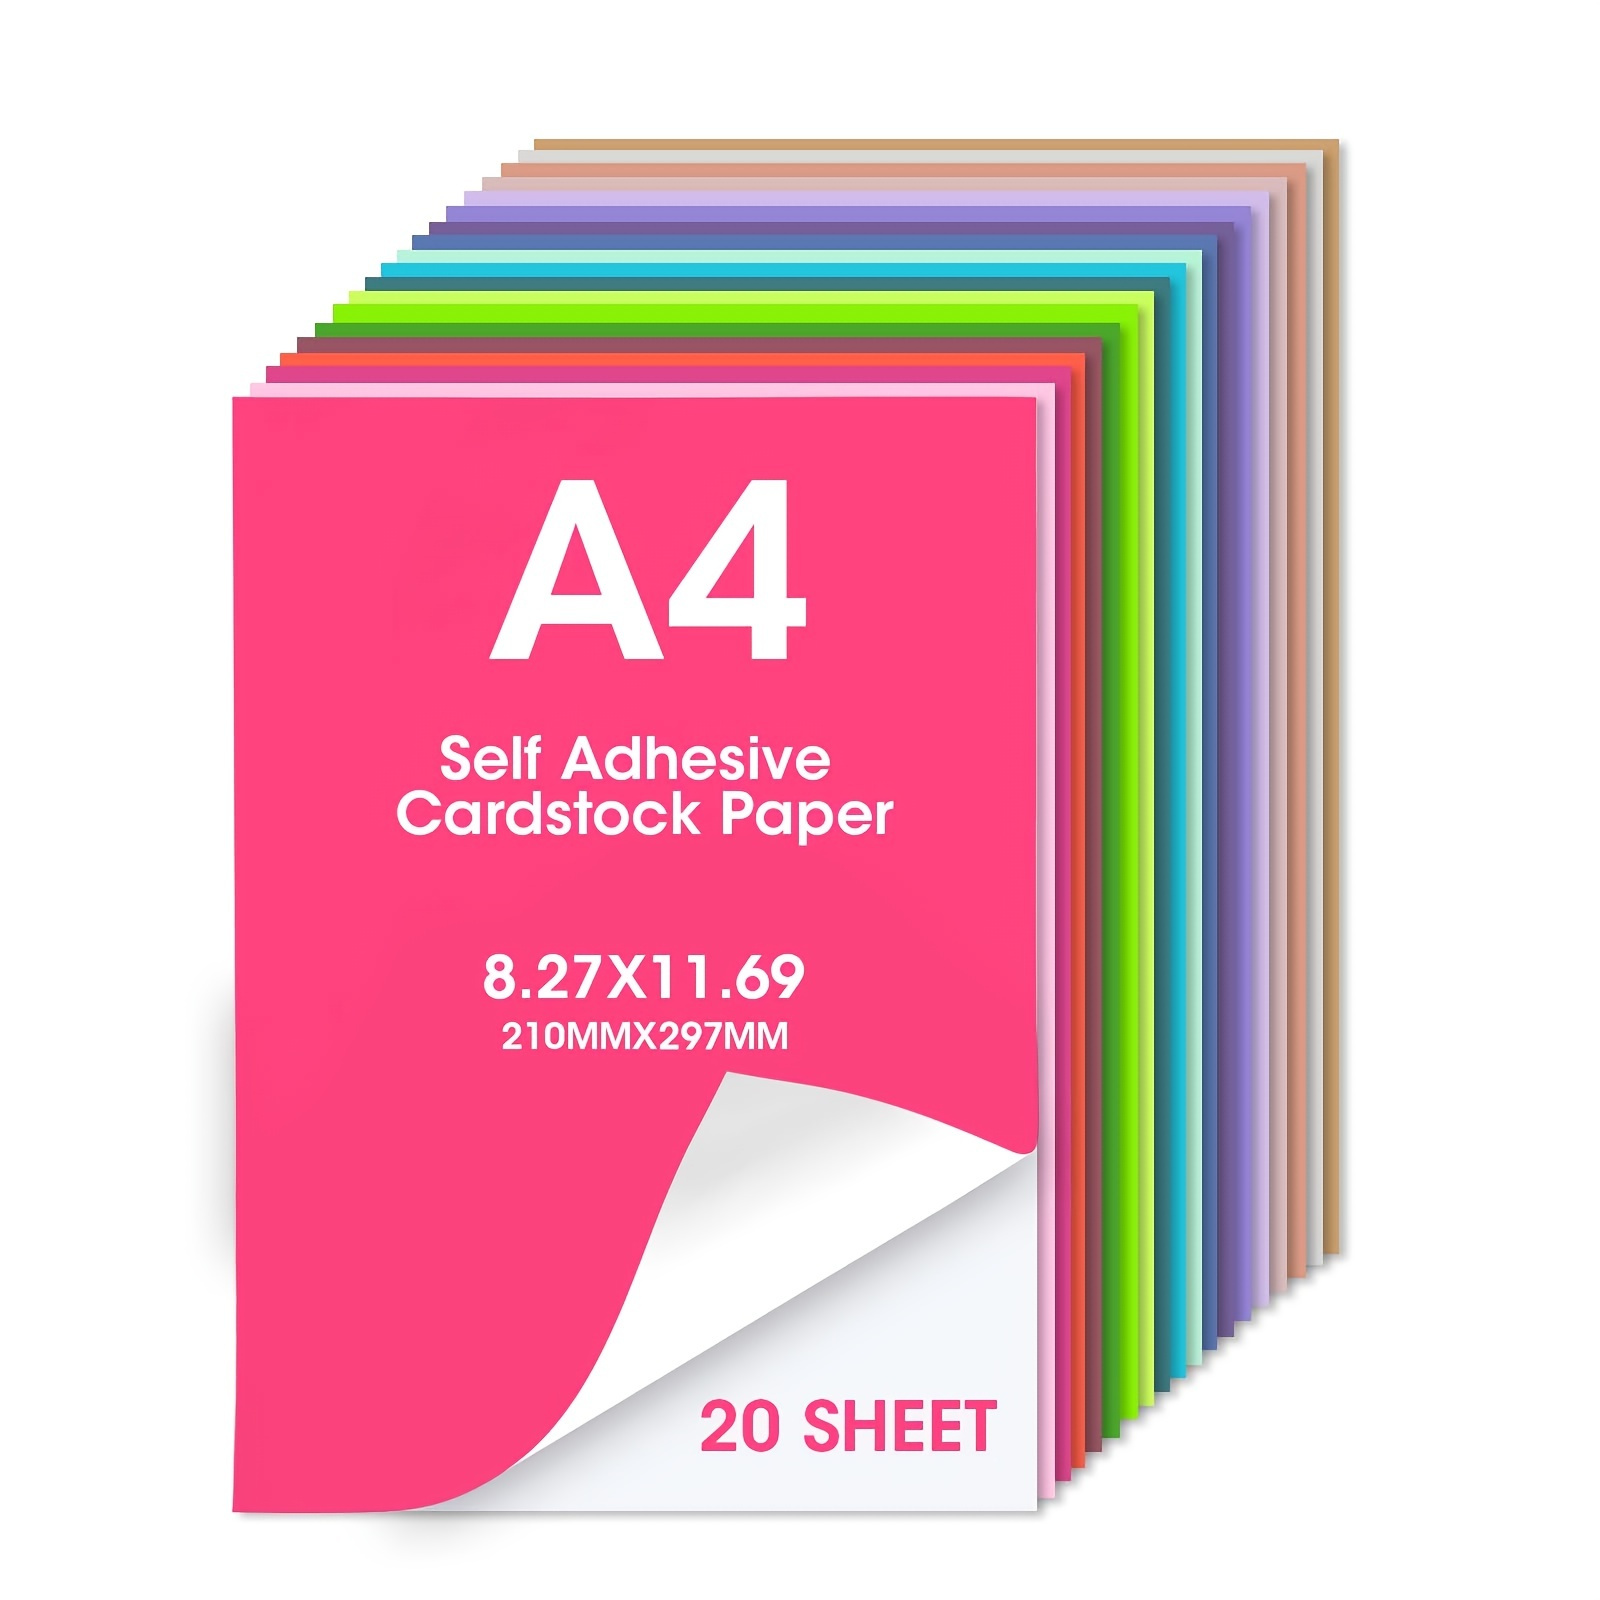 100 Sheets Colored Paper, Colored A4 Copy Paper, Crafting Decorating  Cut-to-Size Paper 100 Sheets 10 Colors For DIY Art Craft (20.98 * 29.69cm)